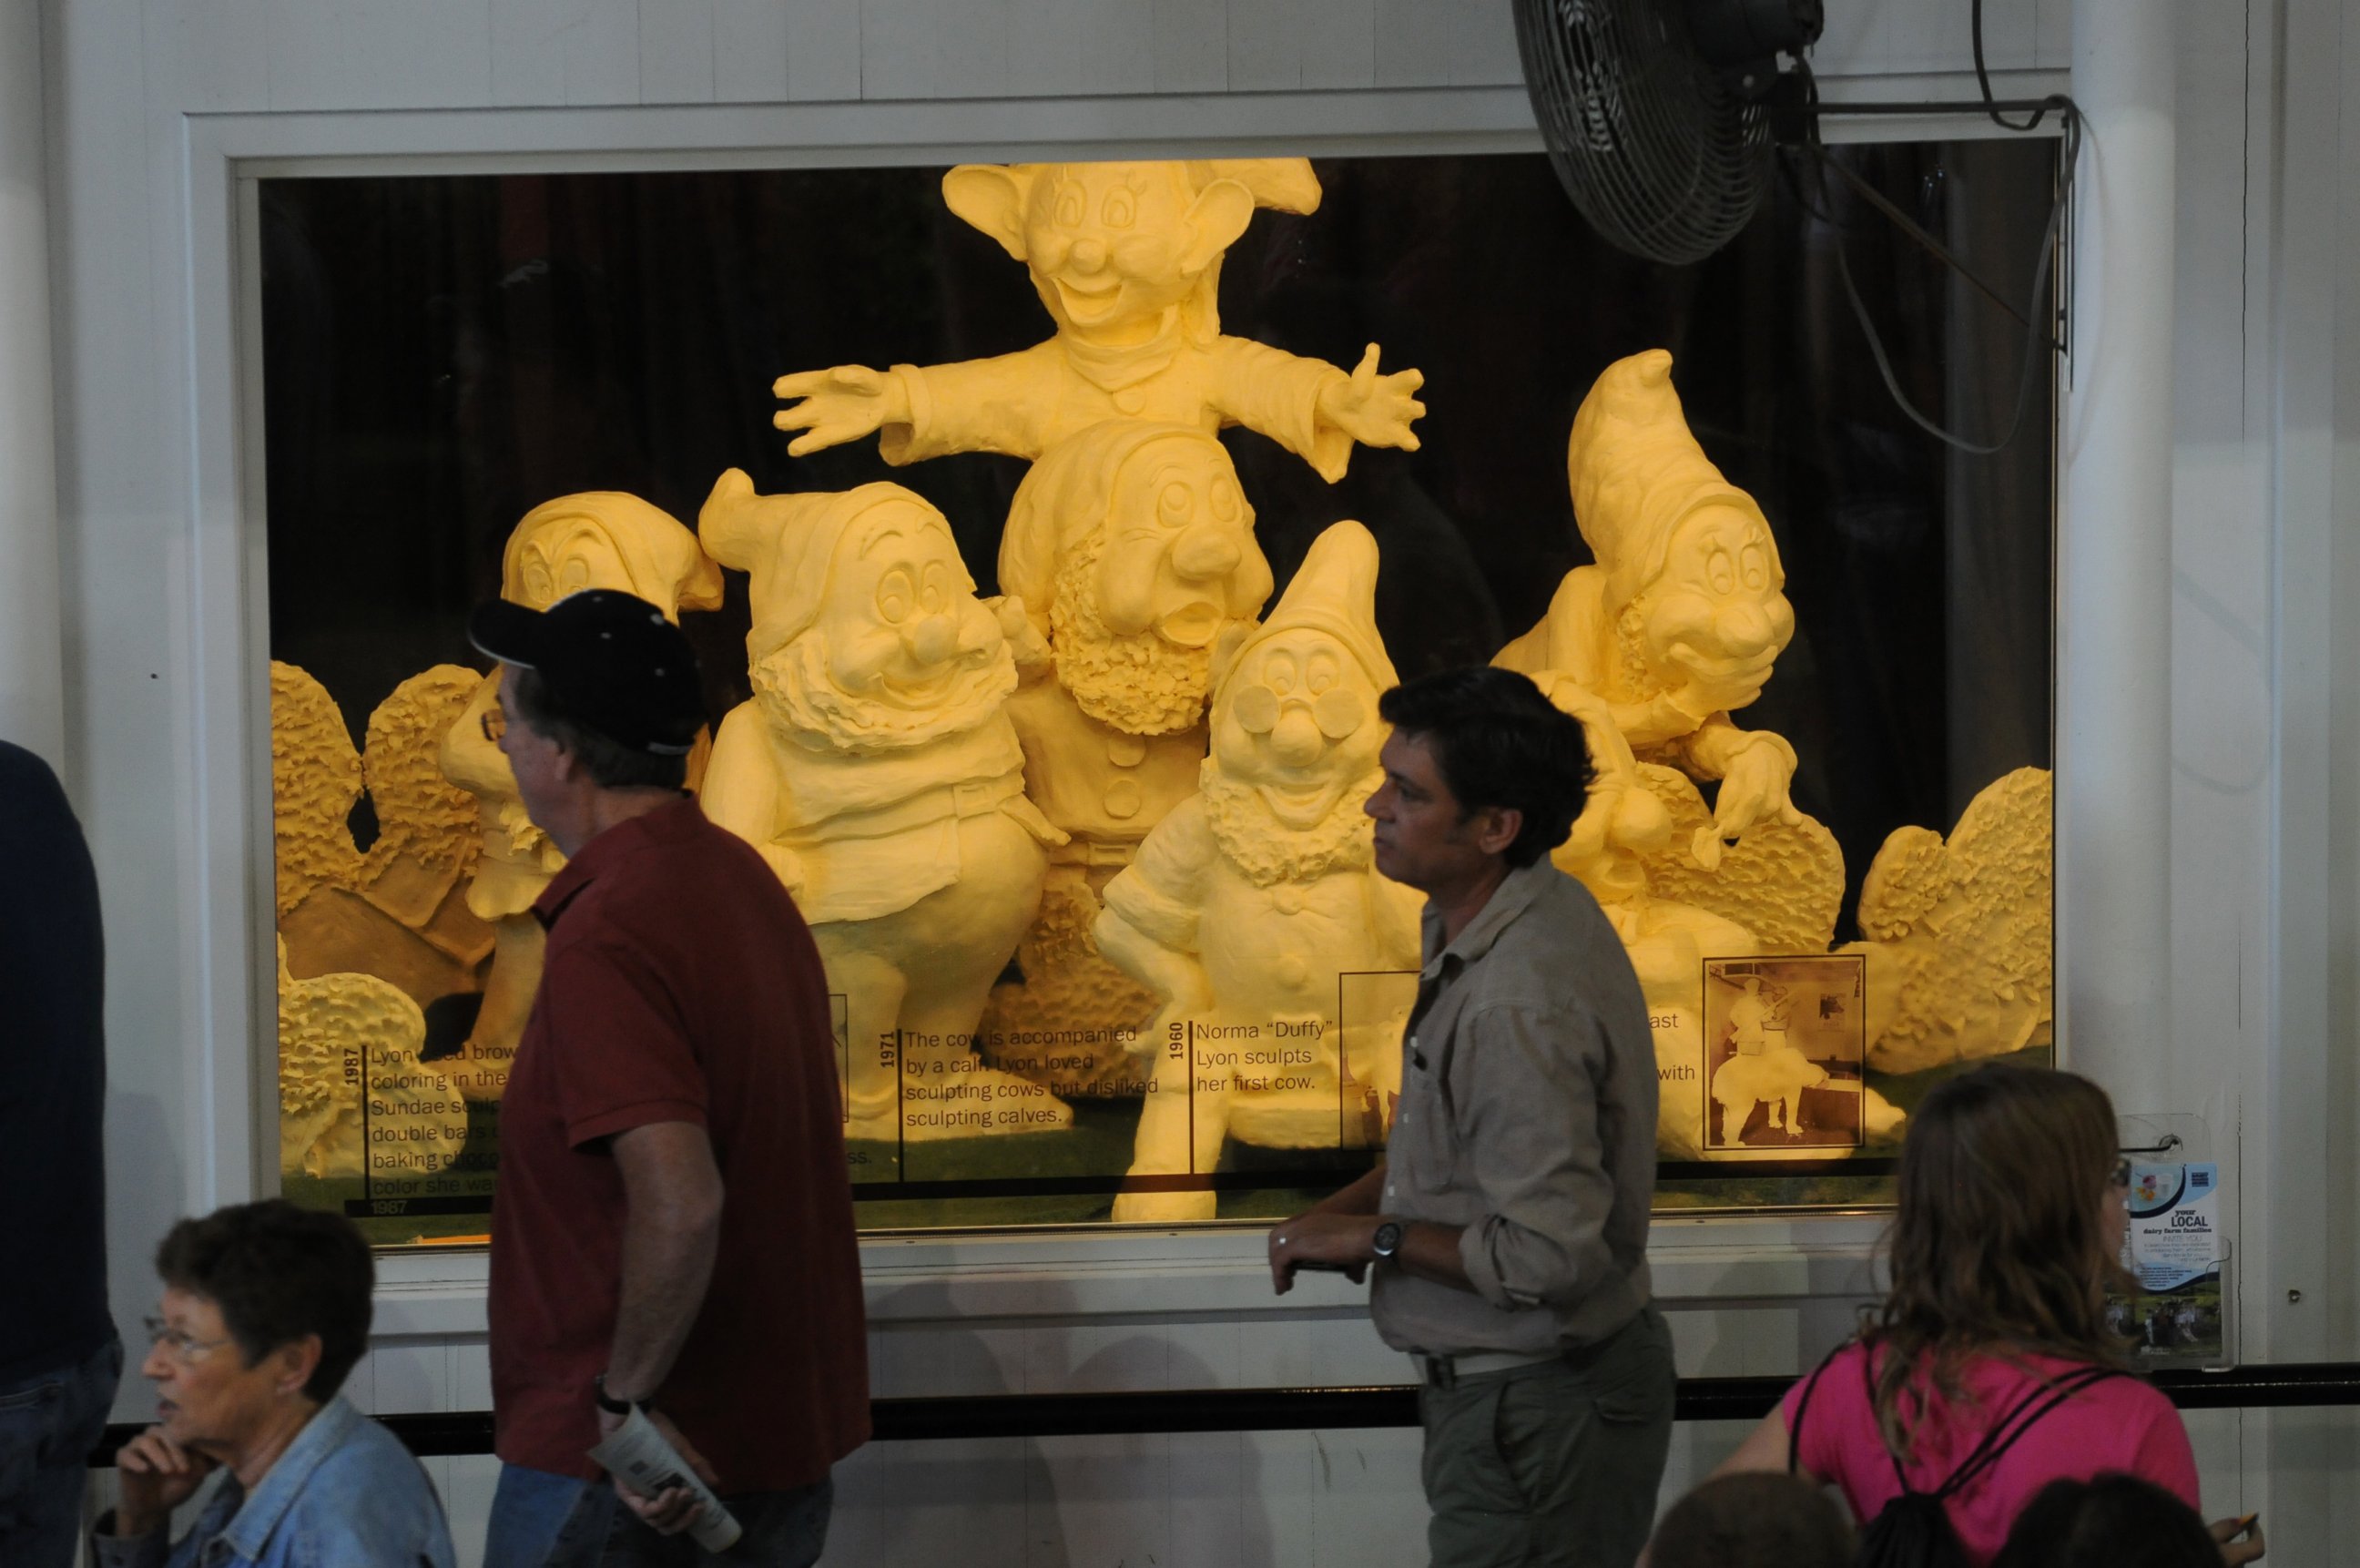 PHOTO: The Iowa State Fair's 2012 companion butter sculpture of Snow White and the Seven Dwarves.